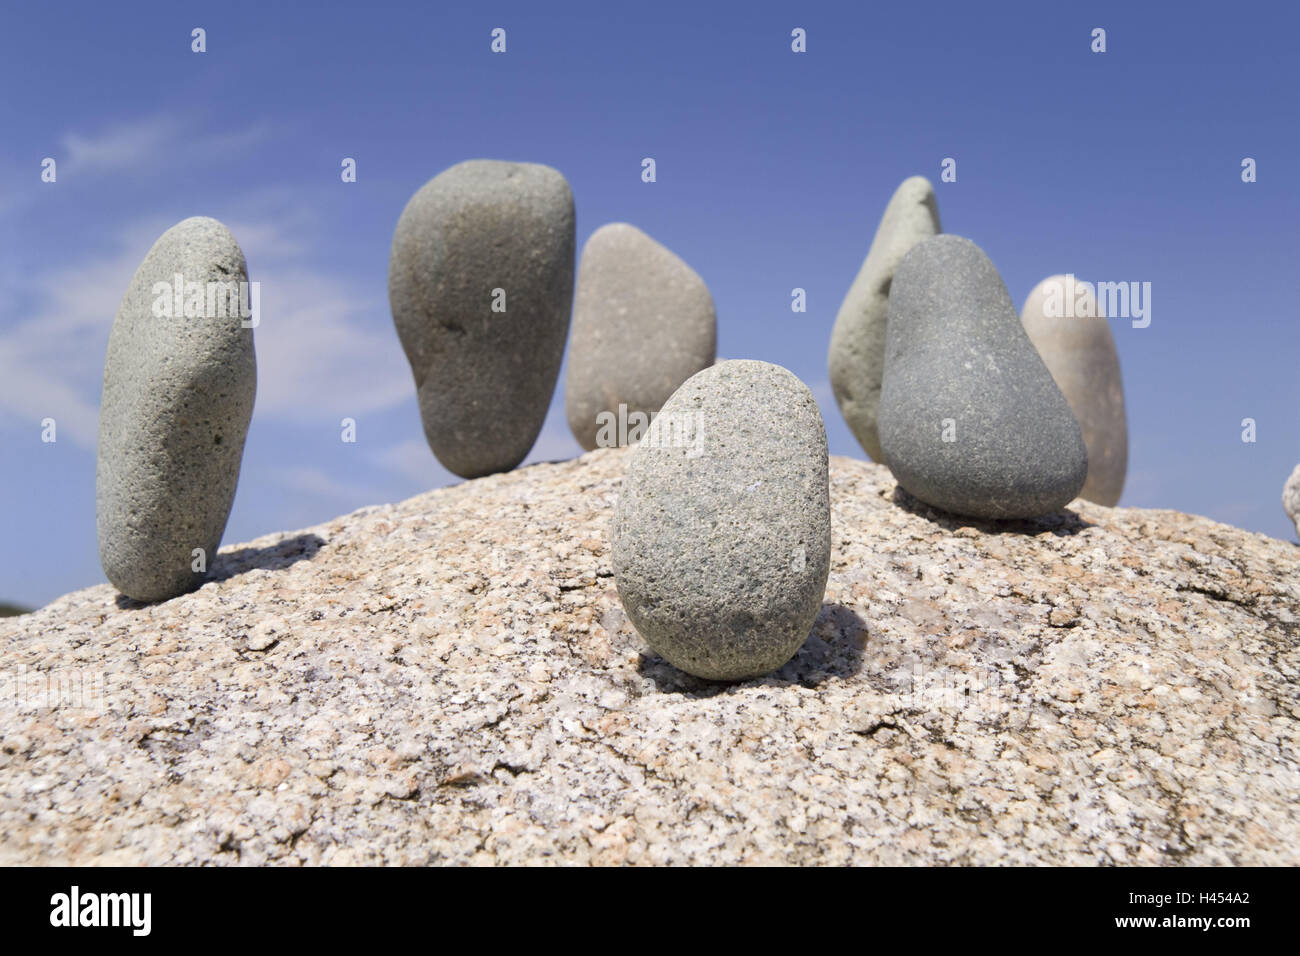 Granite rocks, stones, raised, conception, balance, balance, rock, stone, granite, geology, Around, pebble, on each other, unison, forms, harmony, nature, bile lump, stacked, country kind, nature forms, detail, rest, Zen, icon, esotericism, balance, hardness, stability, lability, Stock Photo